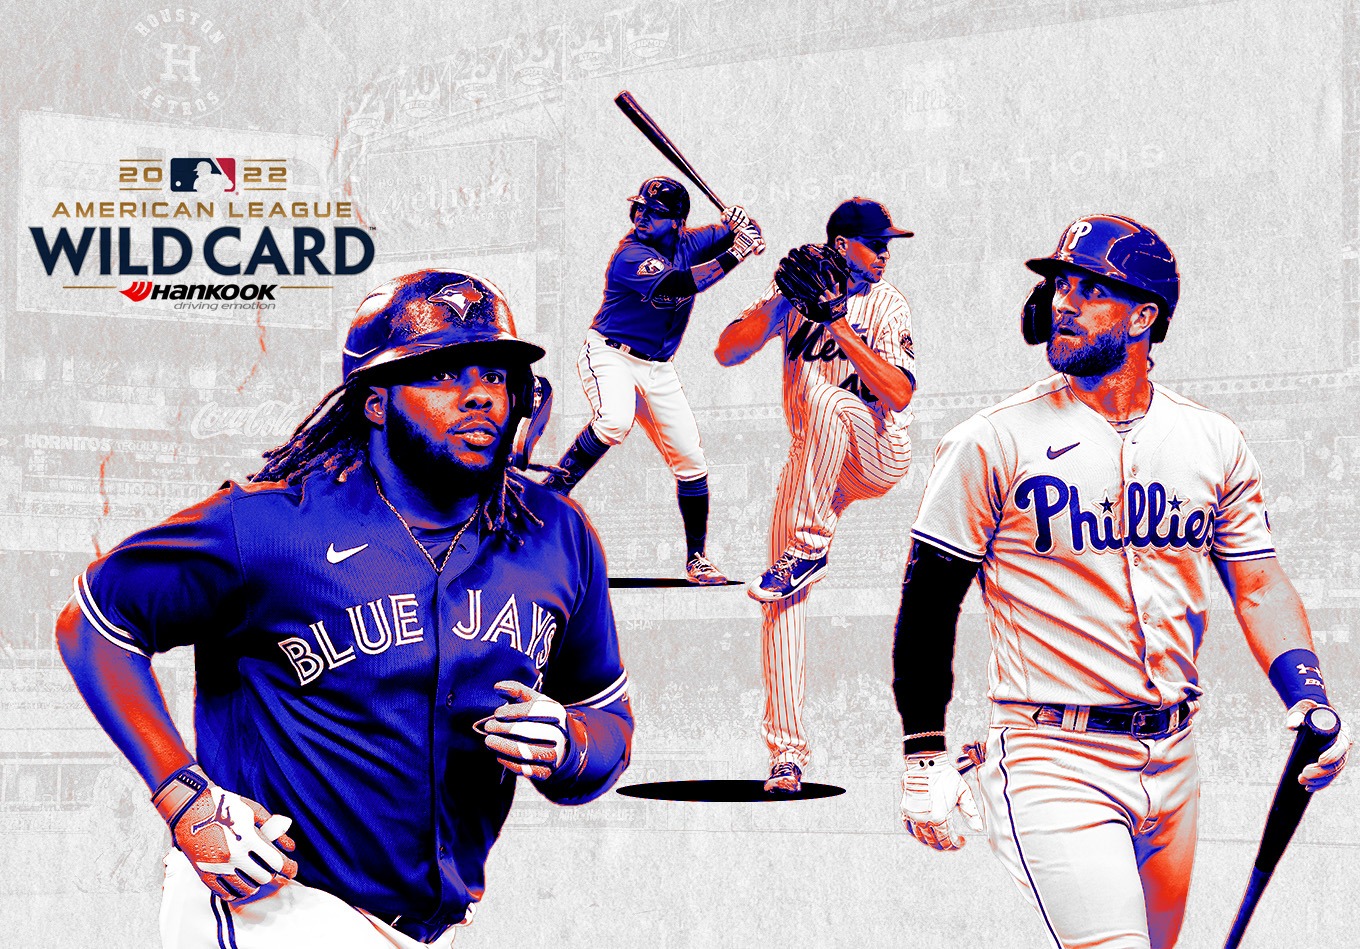 MLB Communications on Twitter The 2020 MLB Postseason will begin with  the AL Wild Card Series on Tuesday 929 while Game One of the 2020 World  Series at Globe Life Field in